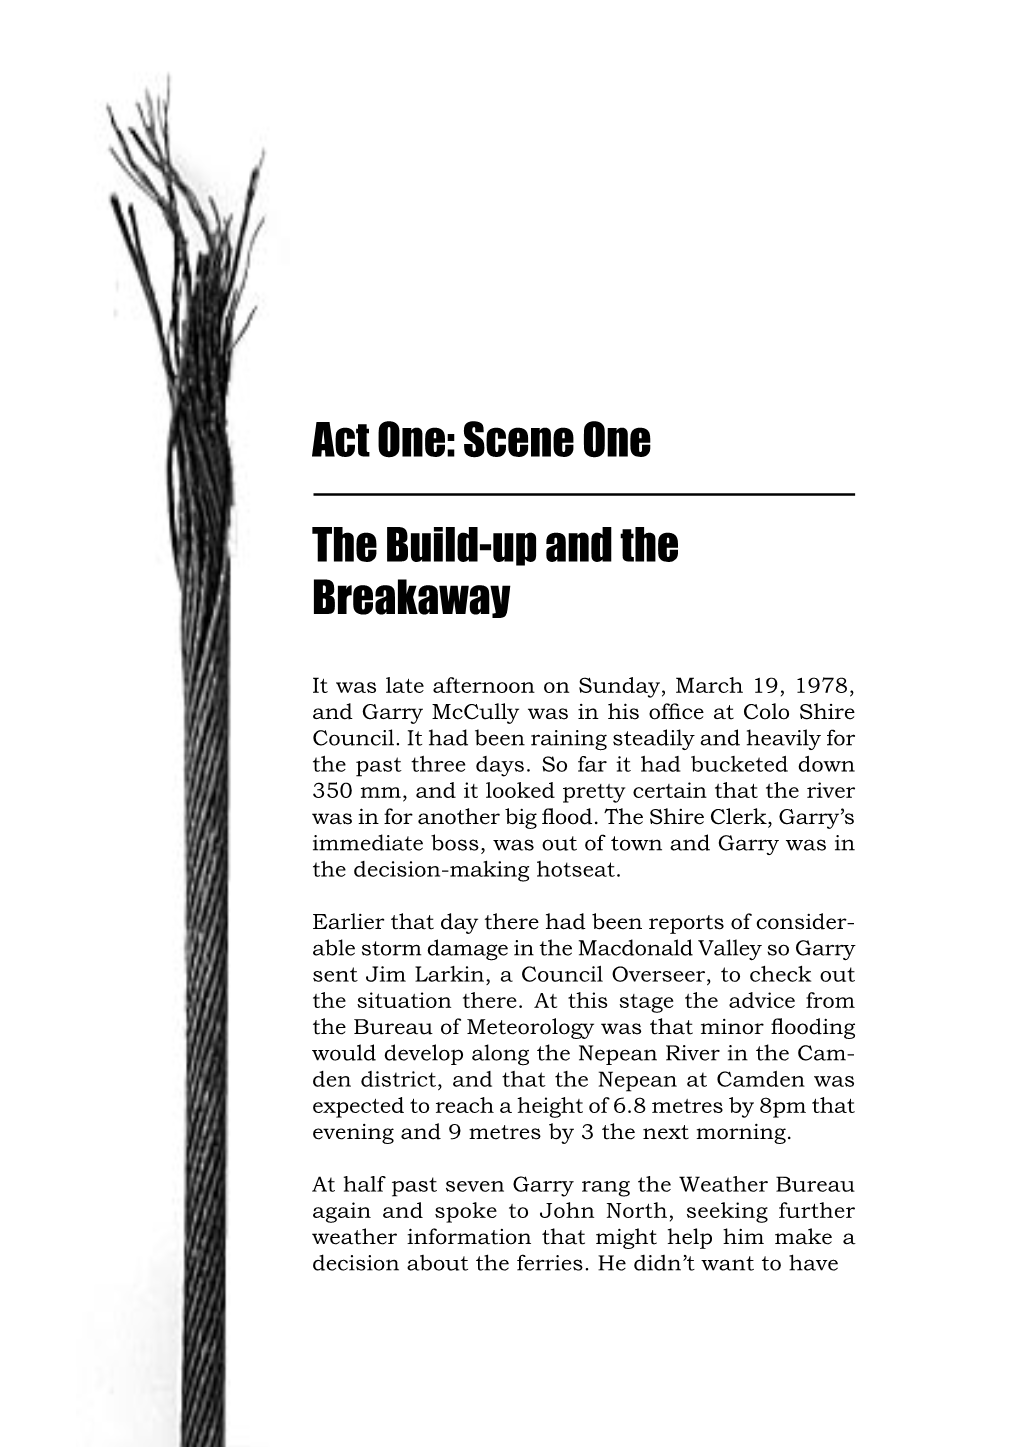 Act One: Scene One the Build-Up and the Breakaway